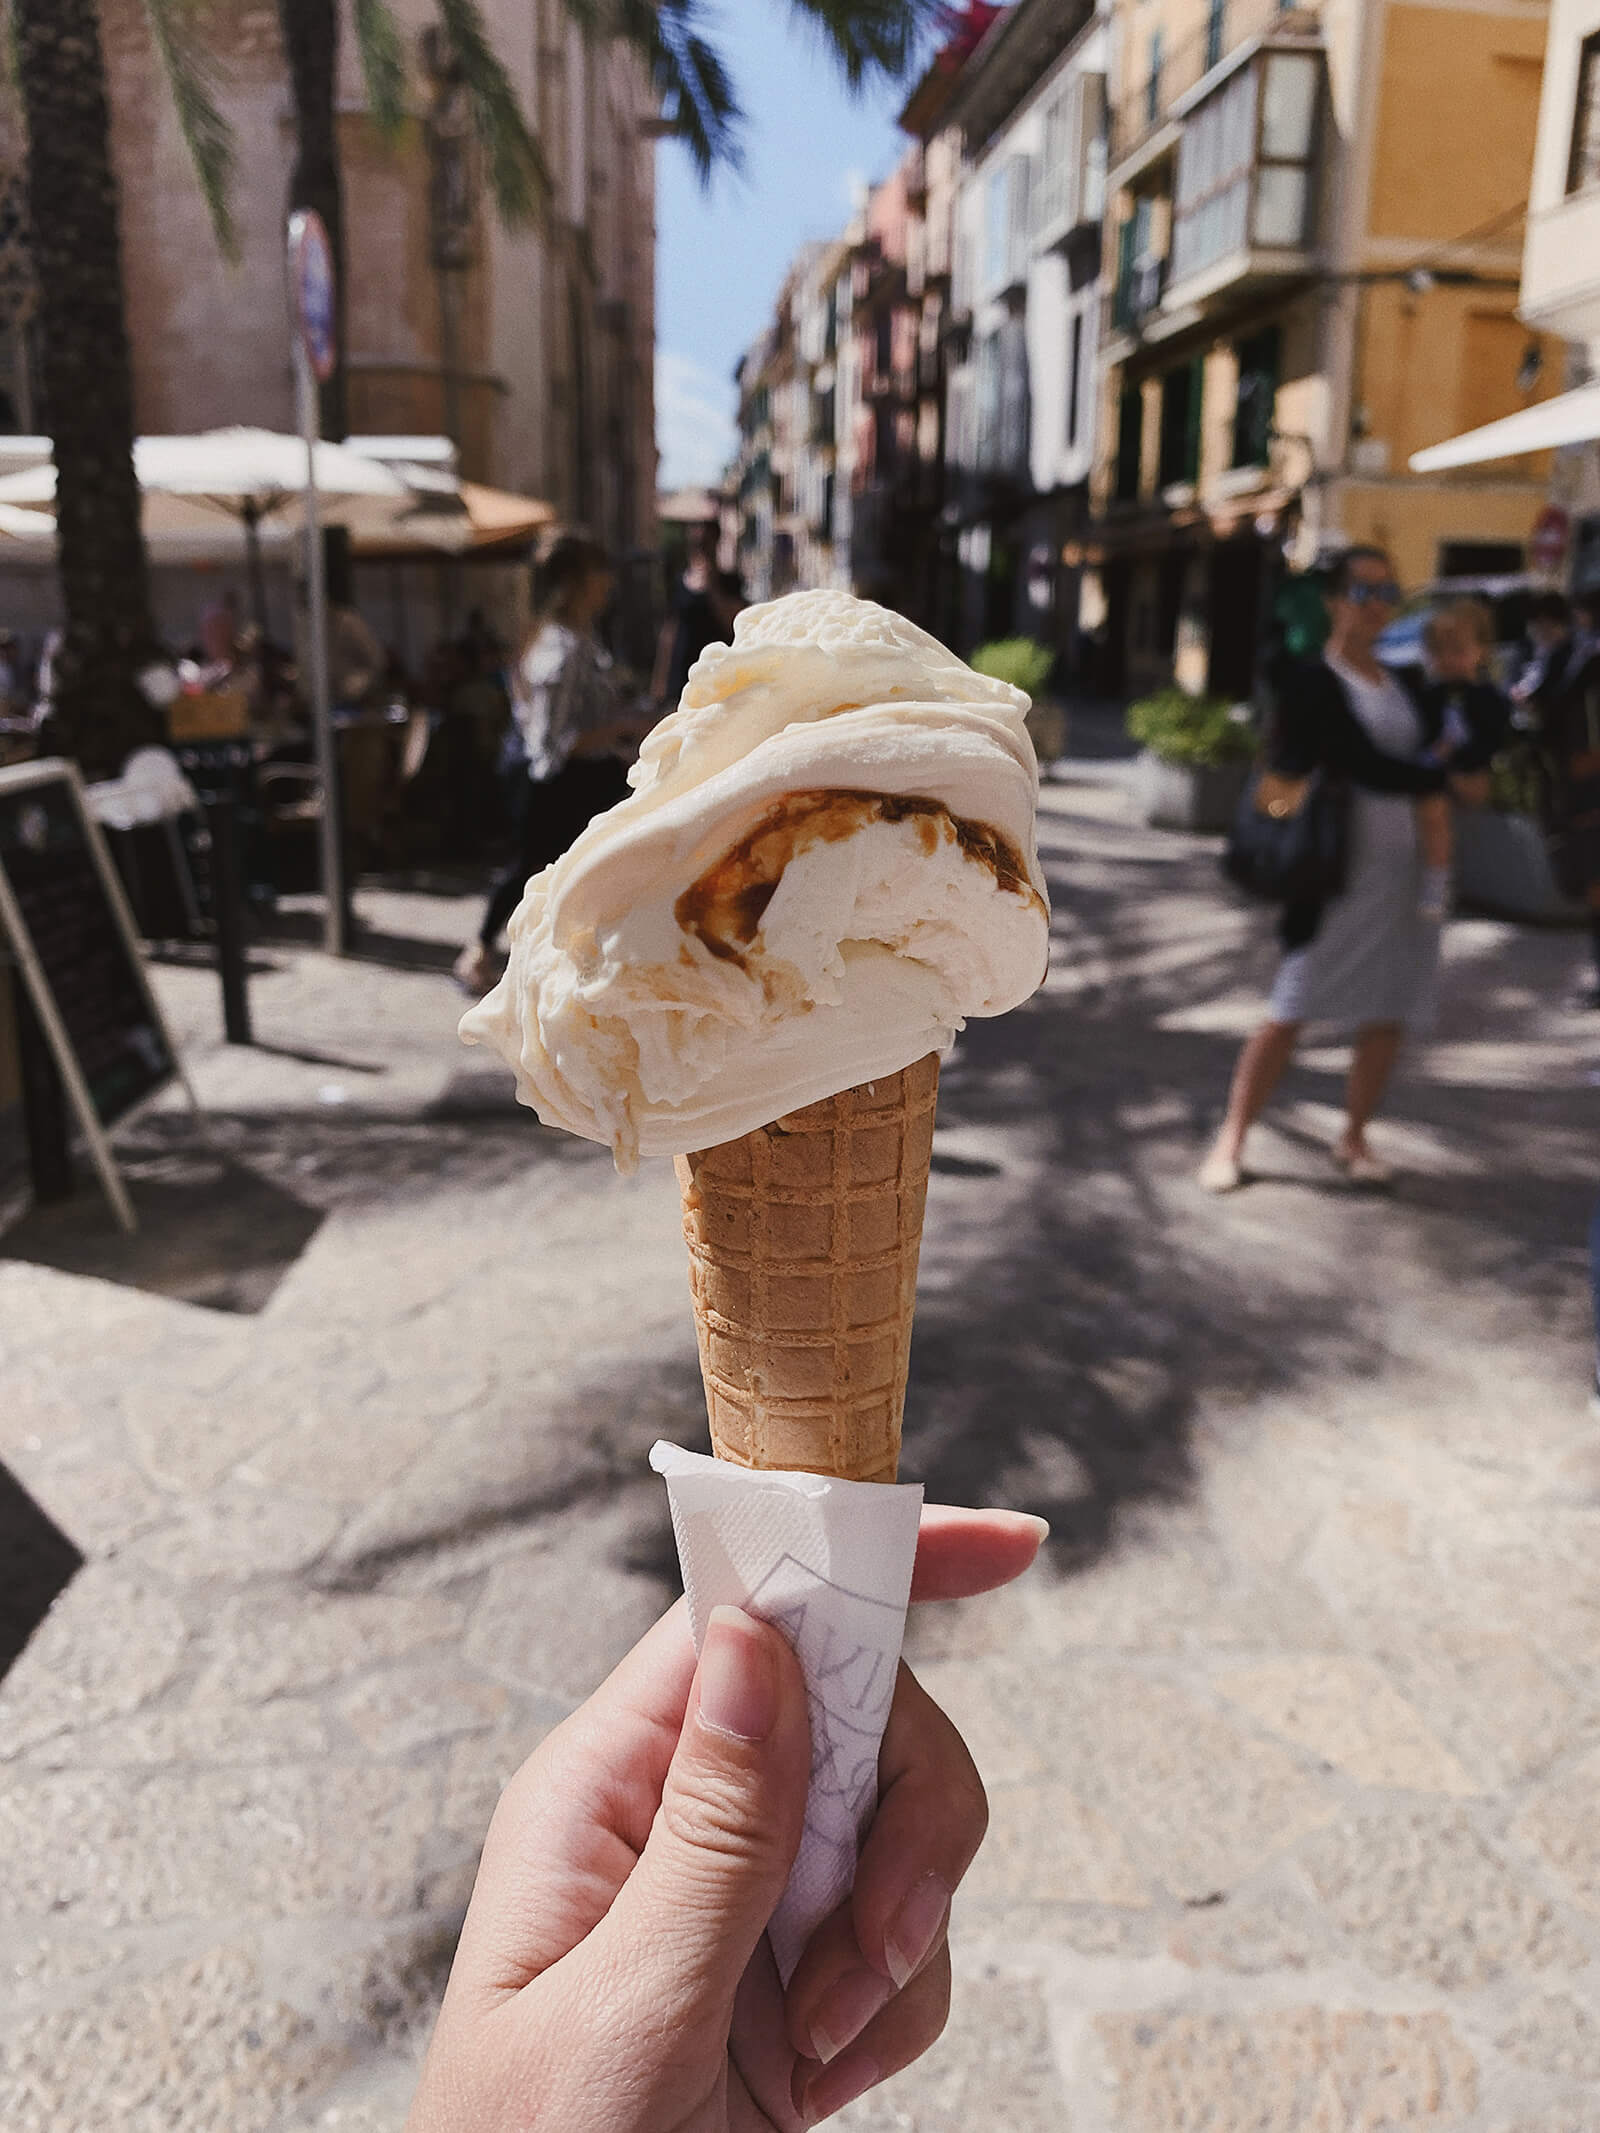 Mallorca travel guide, what to eat in Palma